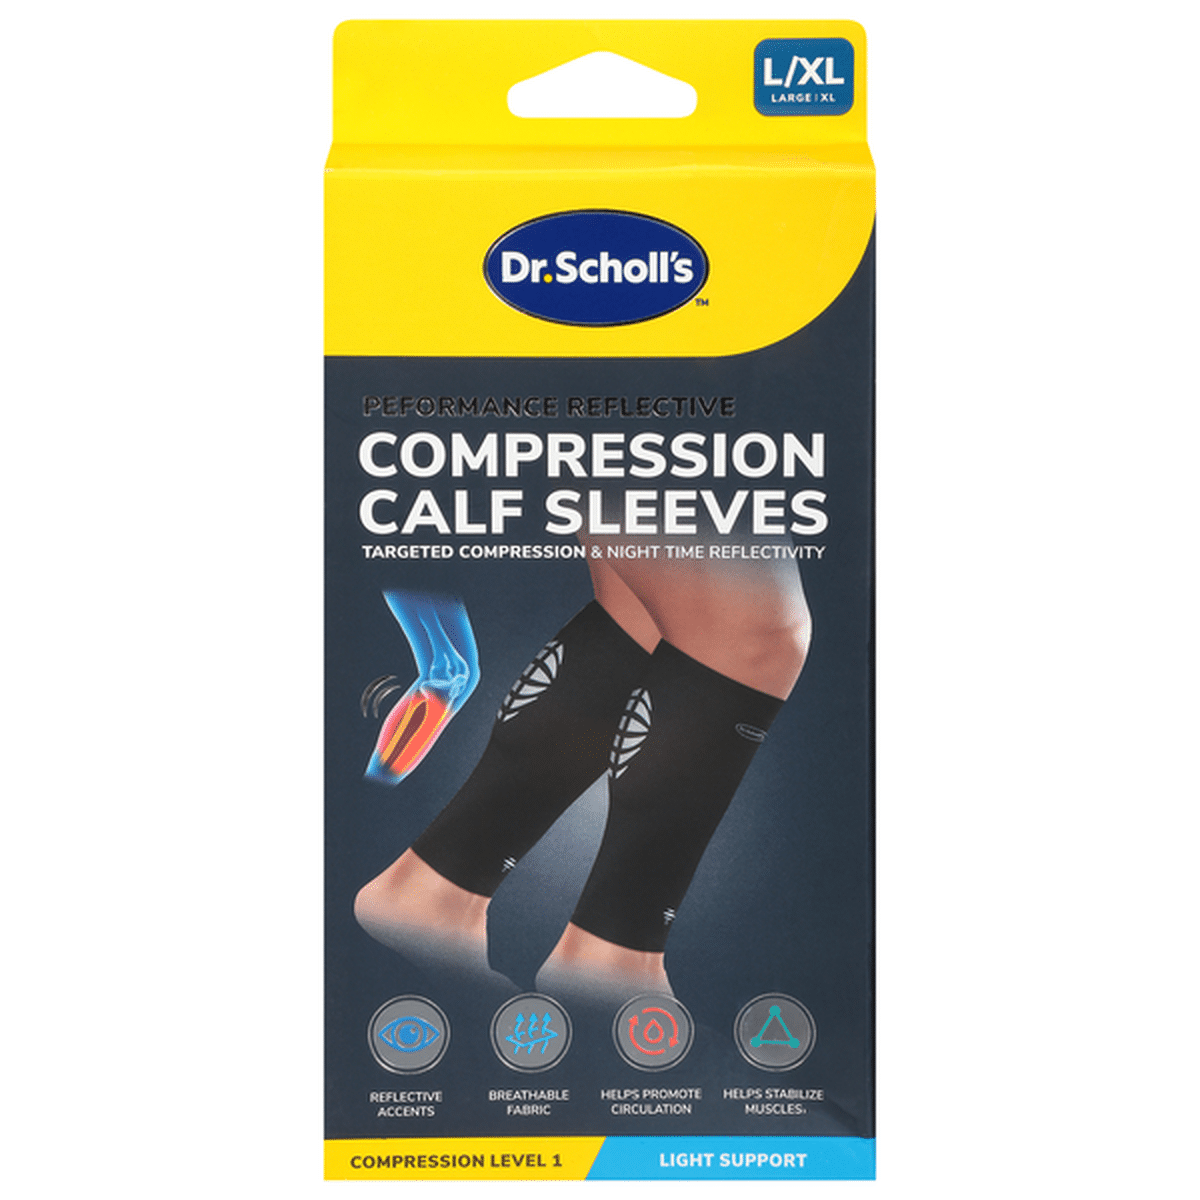 Dr. Scholl's Compression Calf Sleeve with Breathable & Copper-Infused  Fabric for Pain Relief & Support (2-Pack Size L/XL)